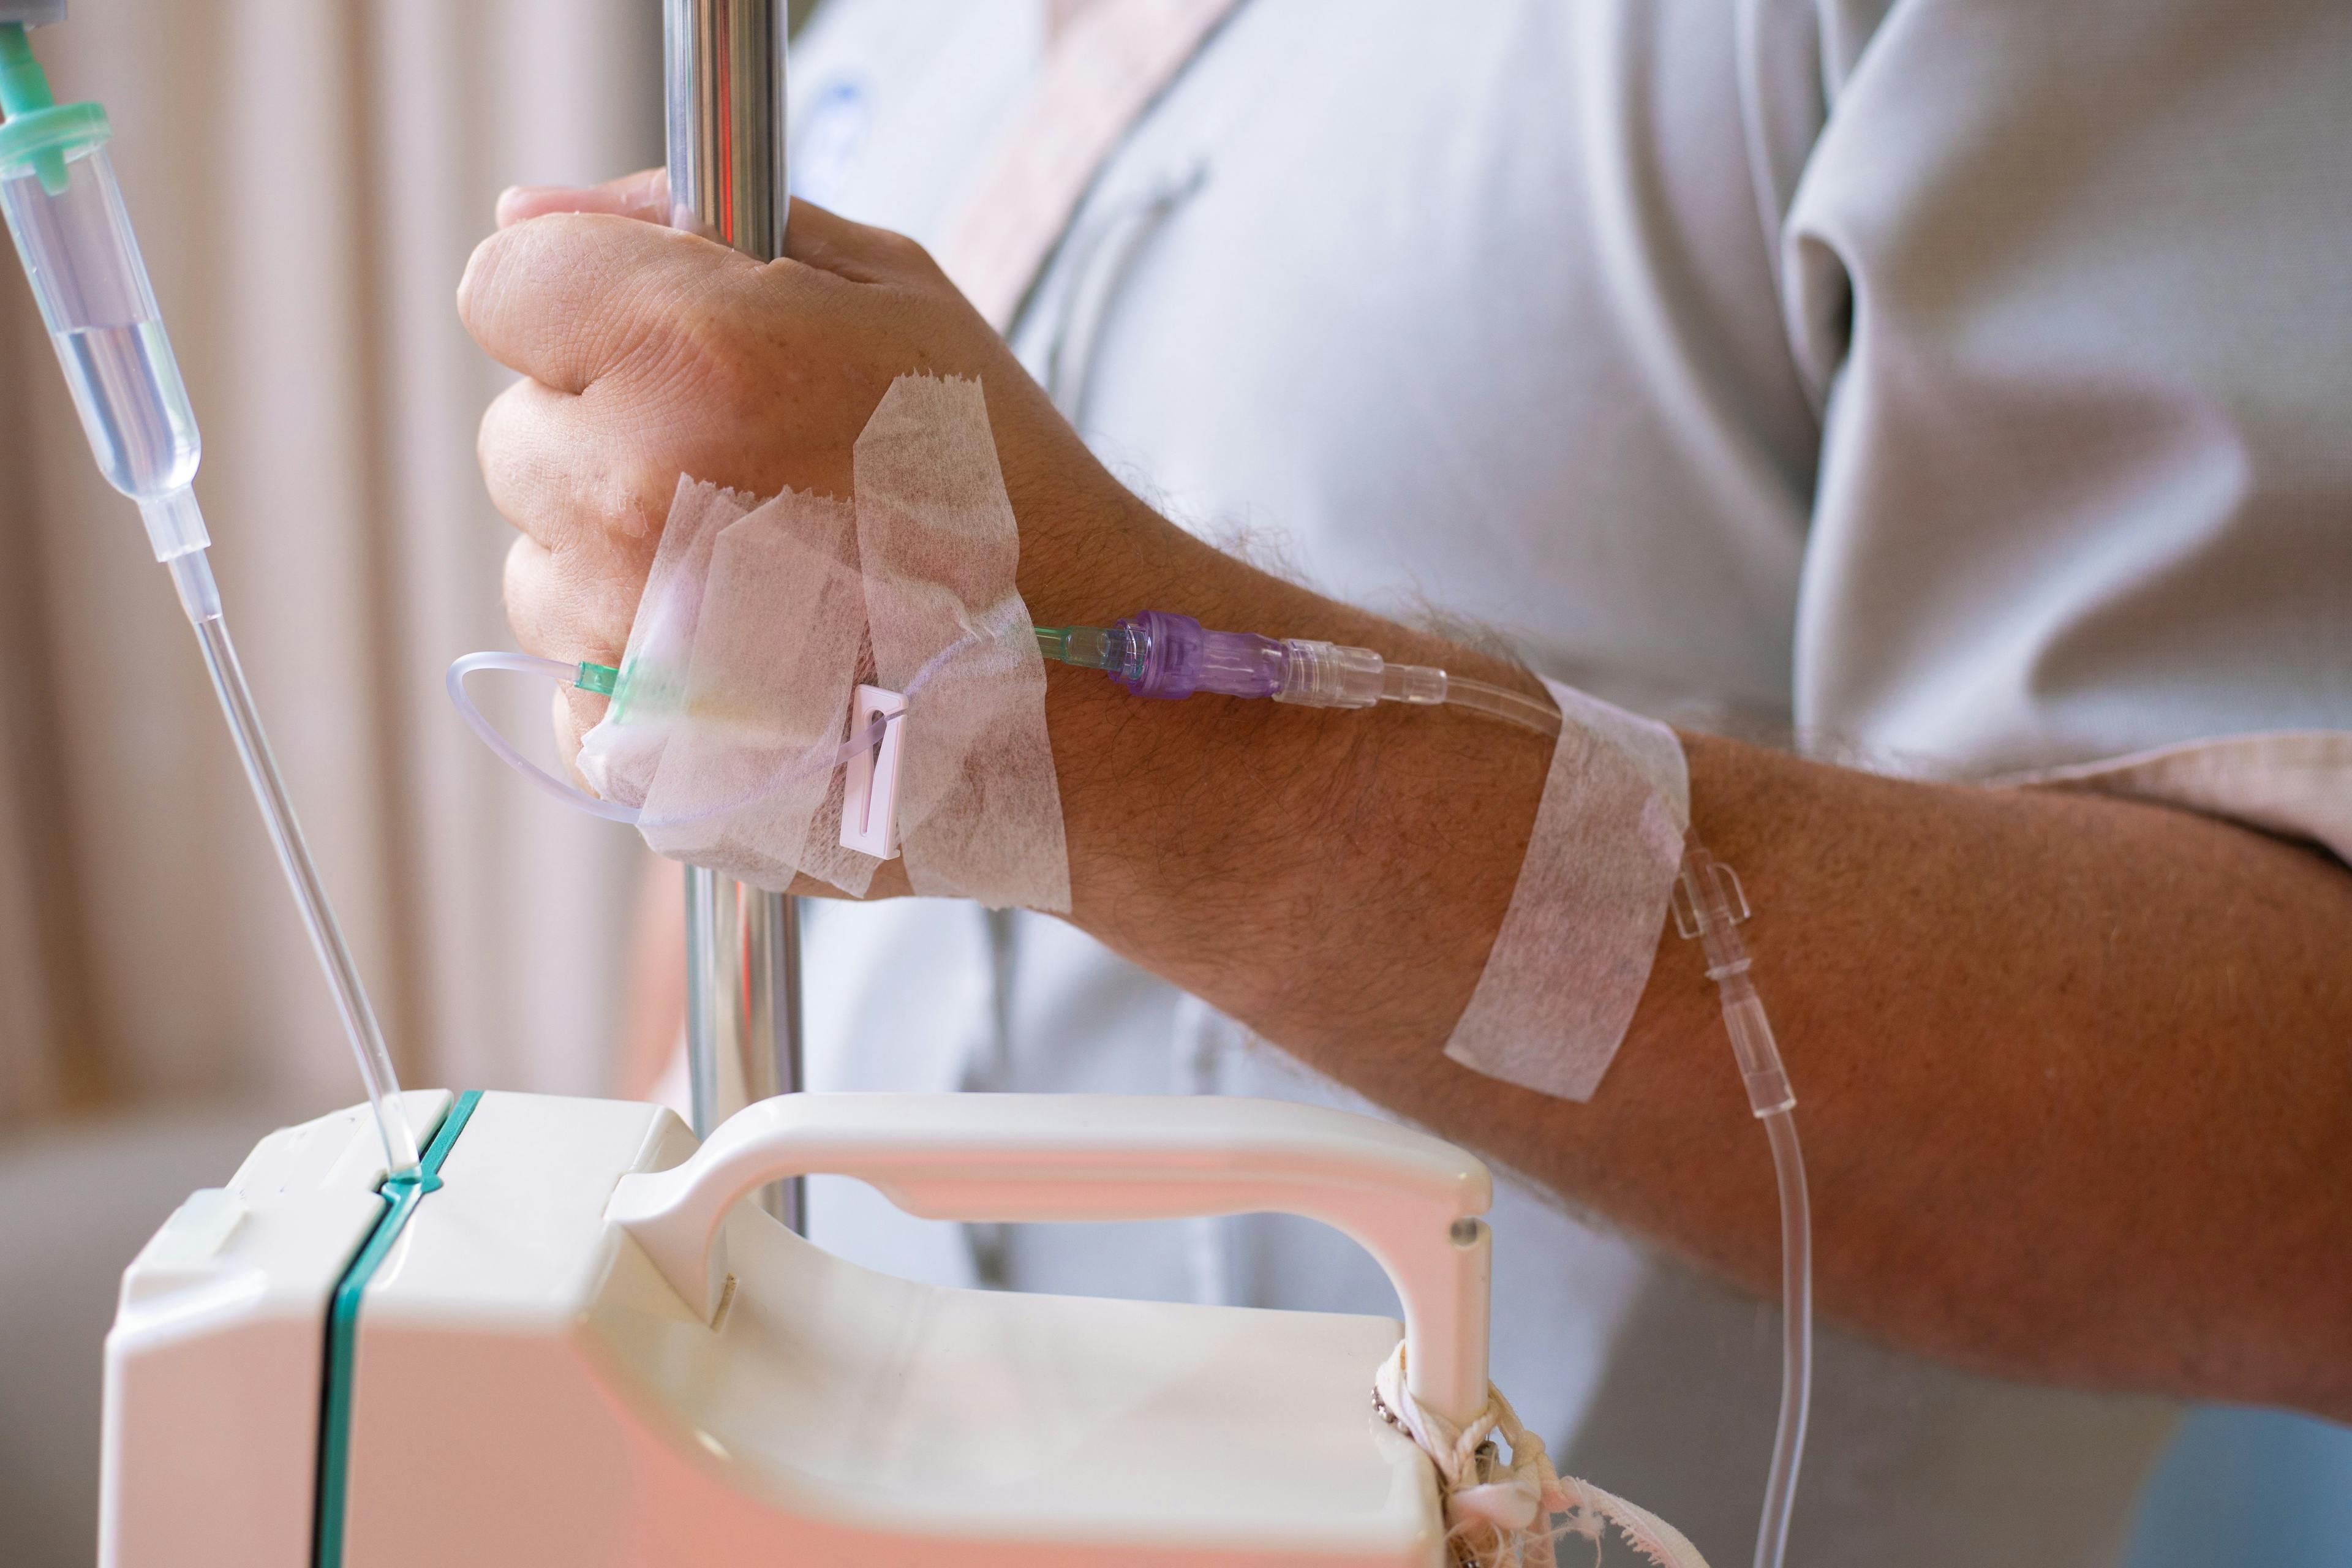 Patient receiving chemotherapy through IV -- Image credit: Denis | stock.adobe.com 